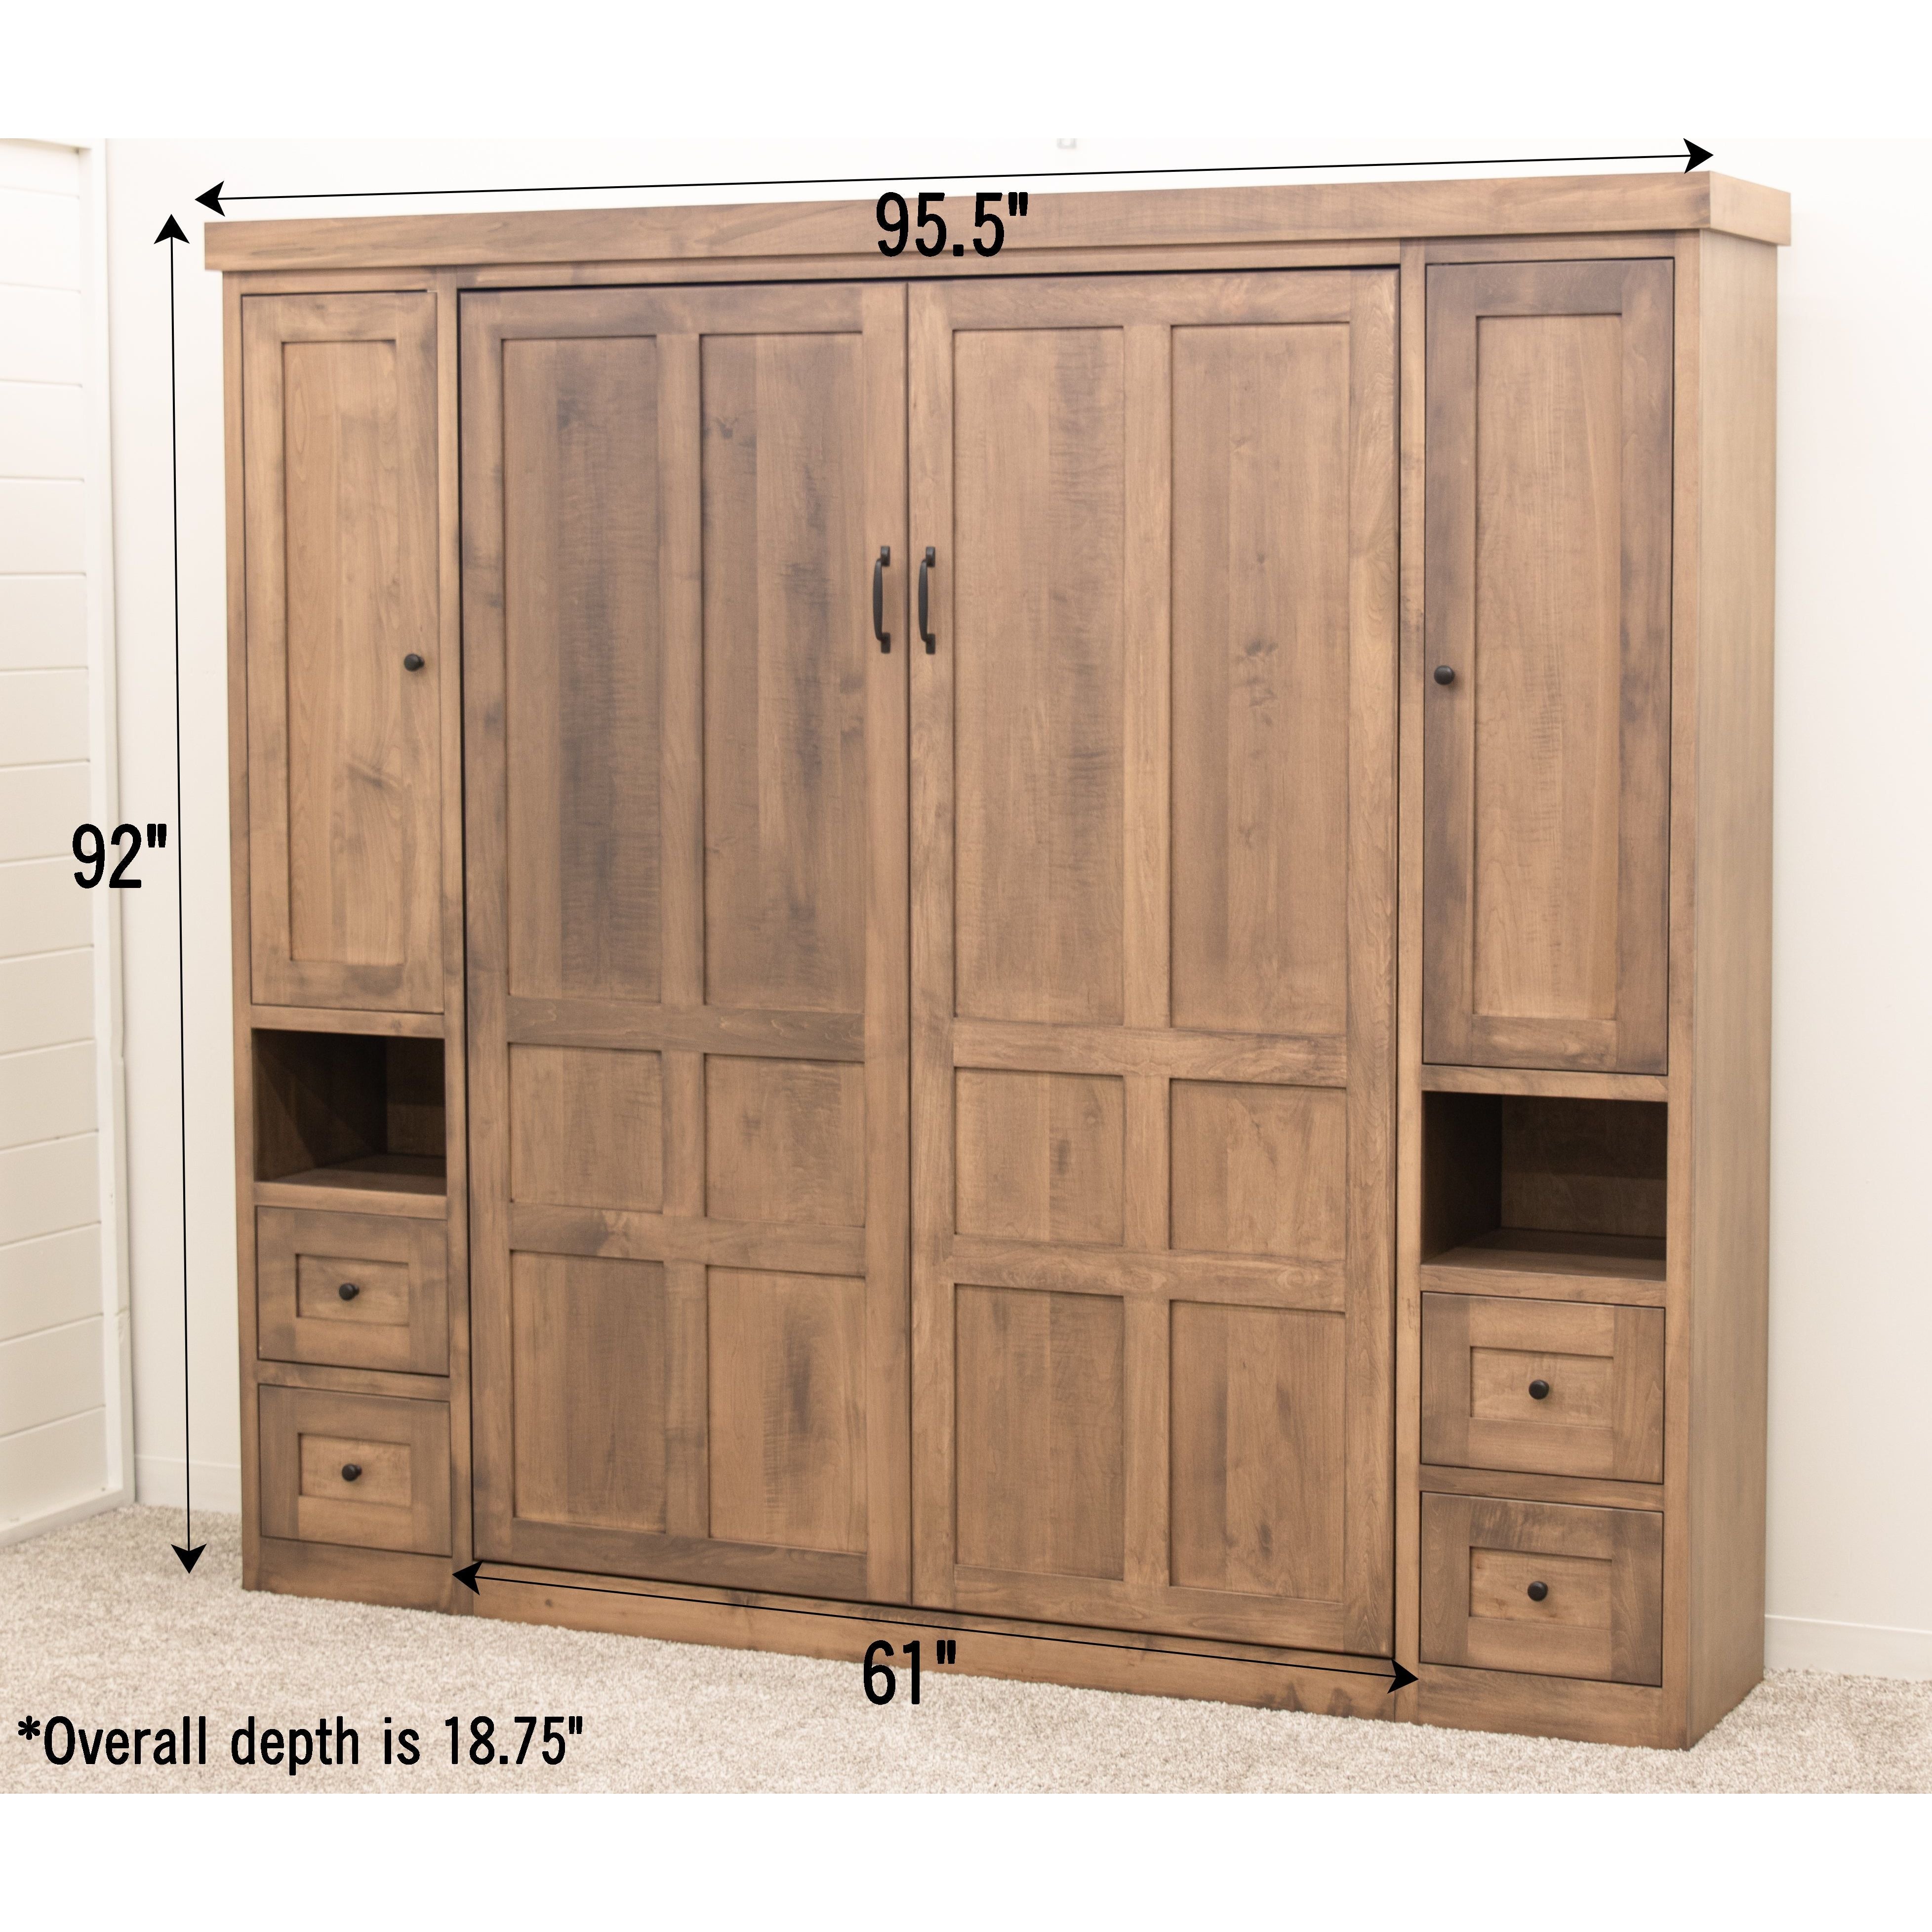 Sunset Murphy Bed with Bookcases